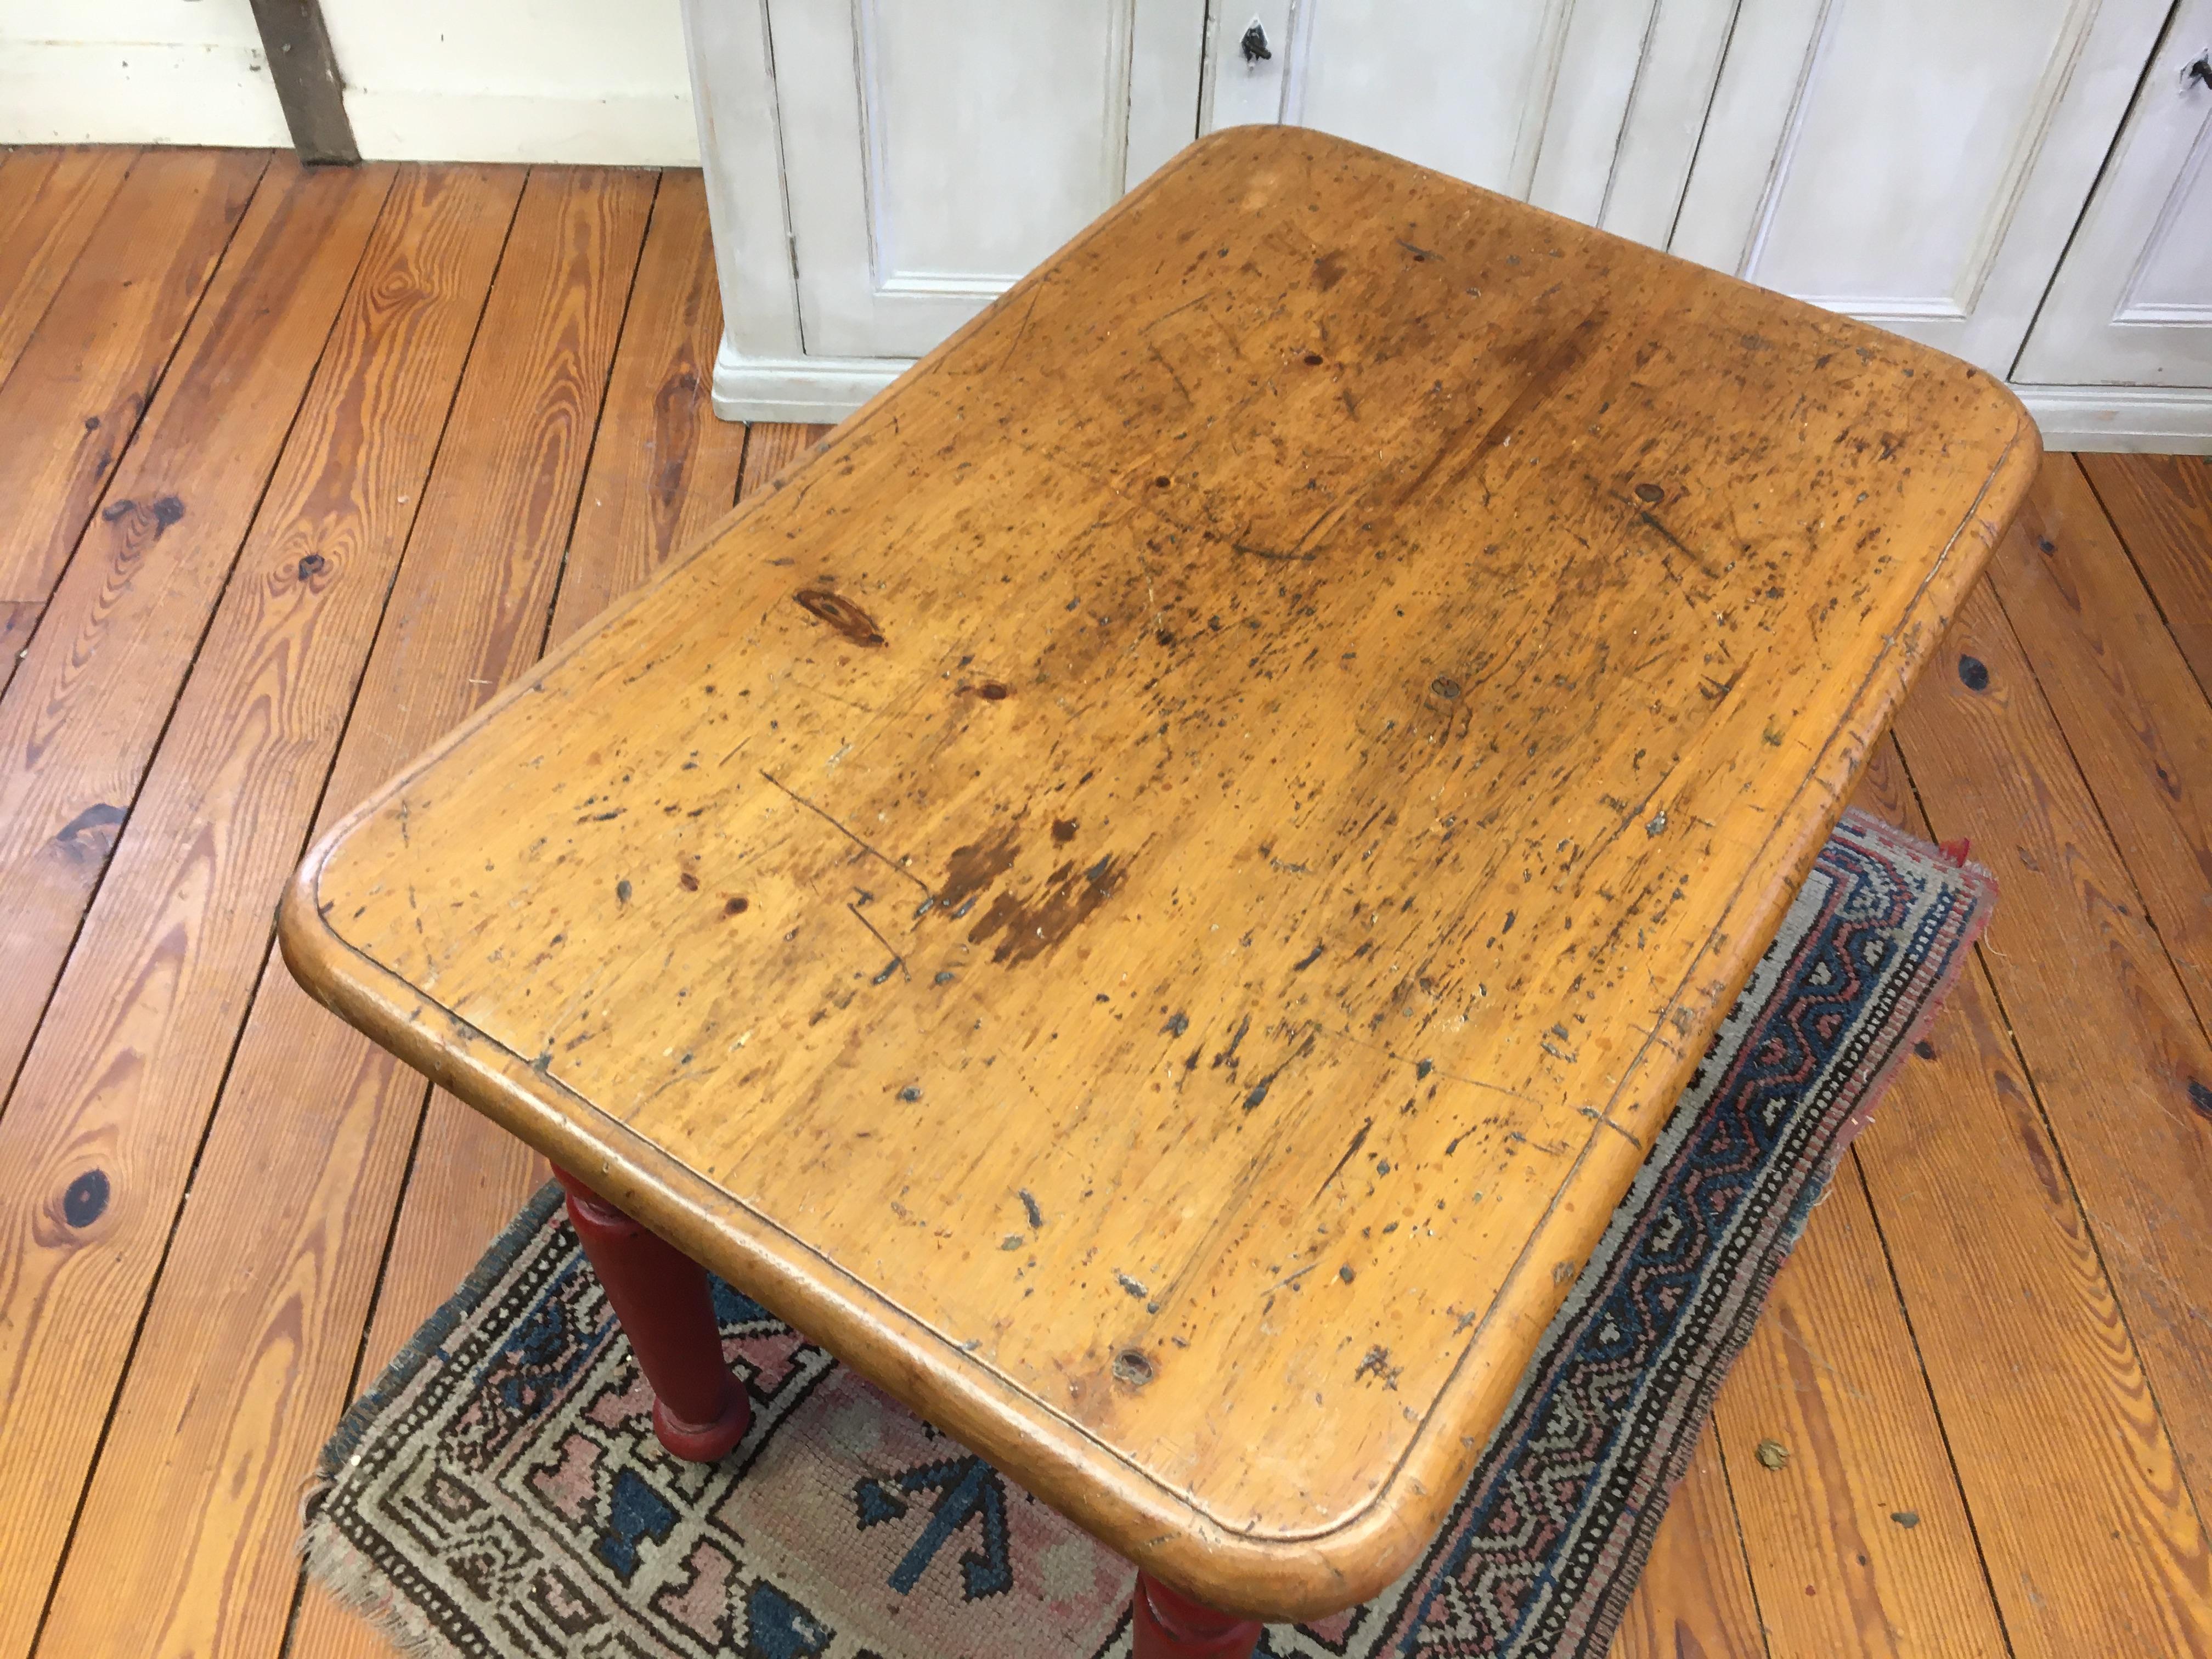 This small side or end table is a knockout! With turned legs and a wonderful patina on the table top, this would look great in any room in your home.